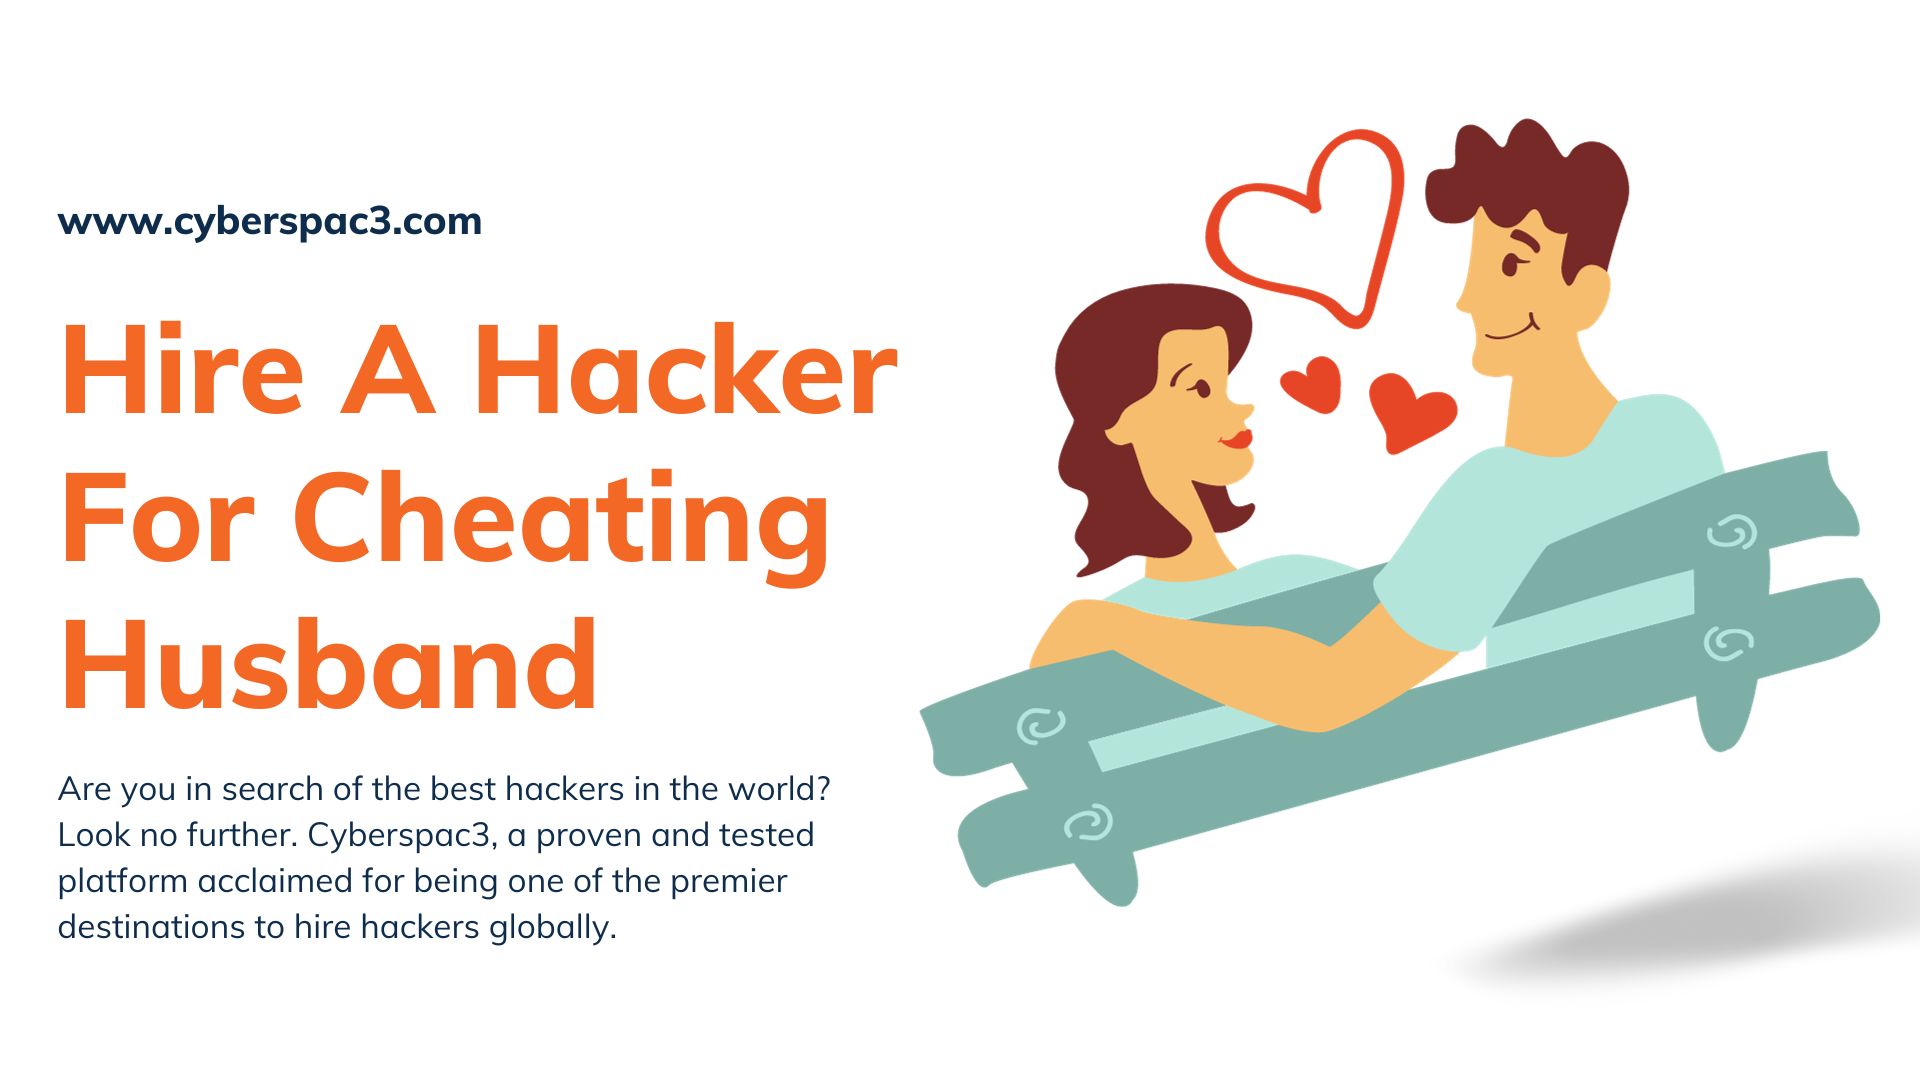 Hire A Hacker For Cheating Husband